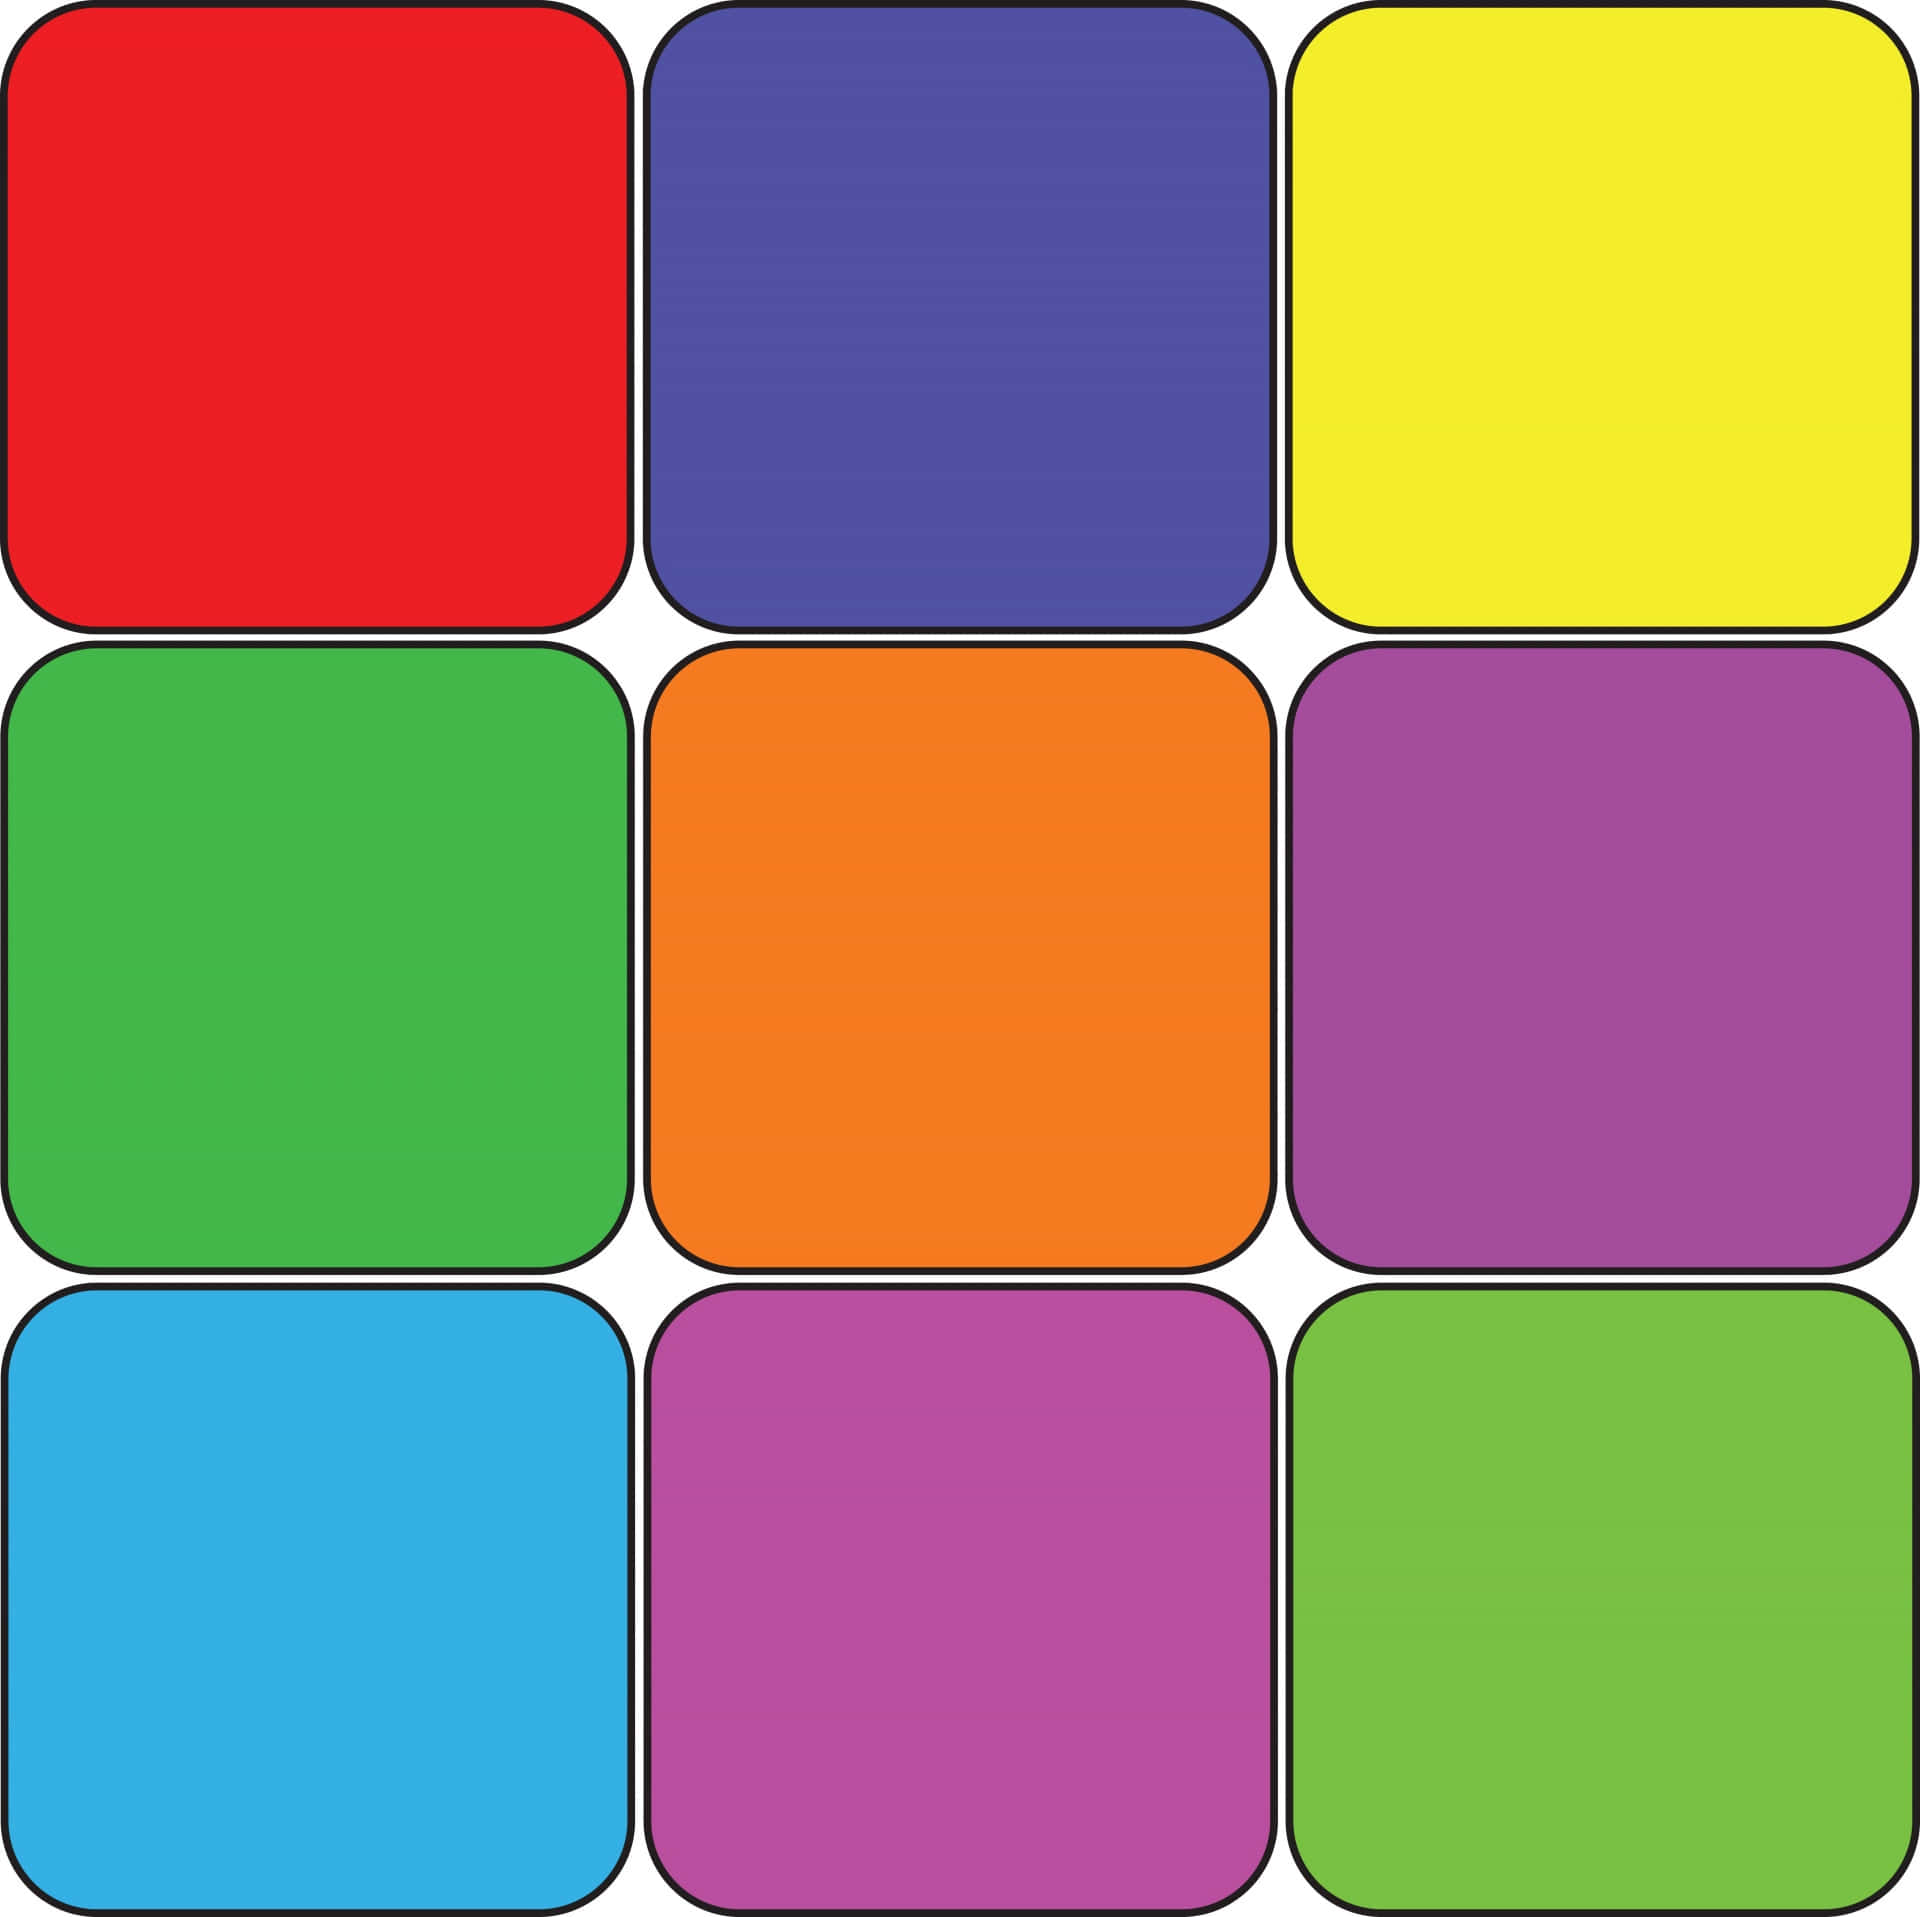 A Colorful Square Puzzle With Different Colors